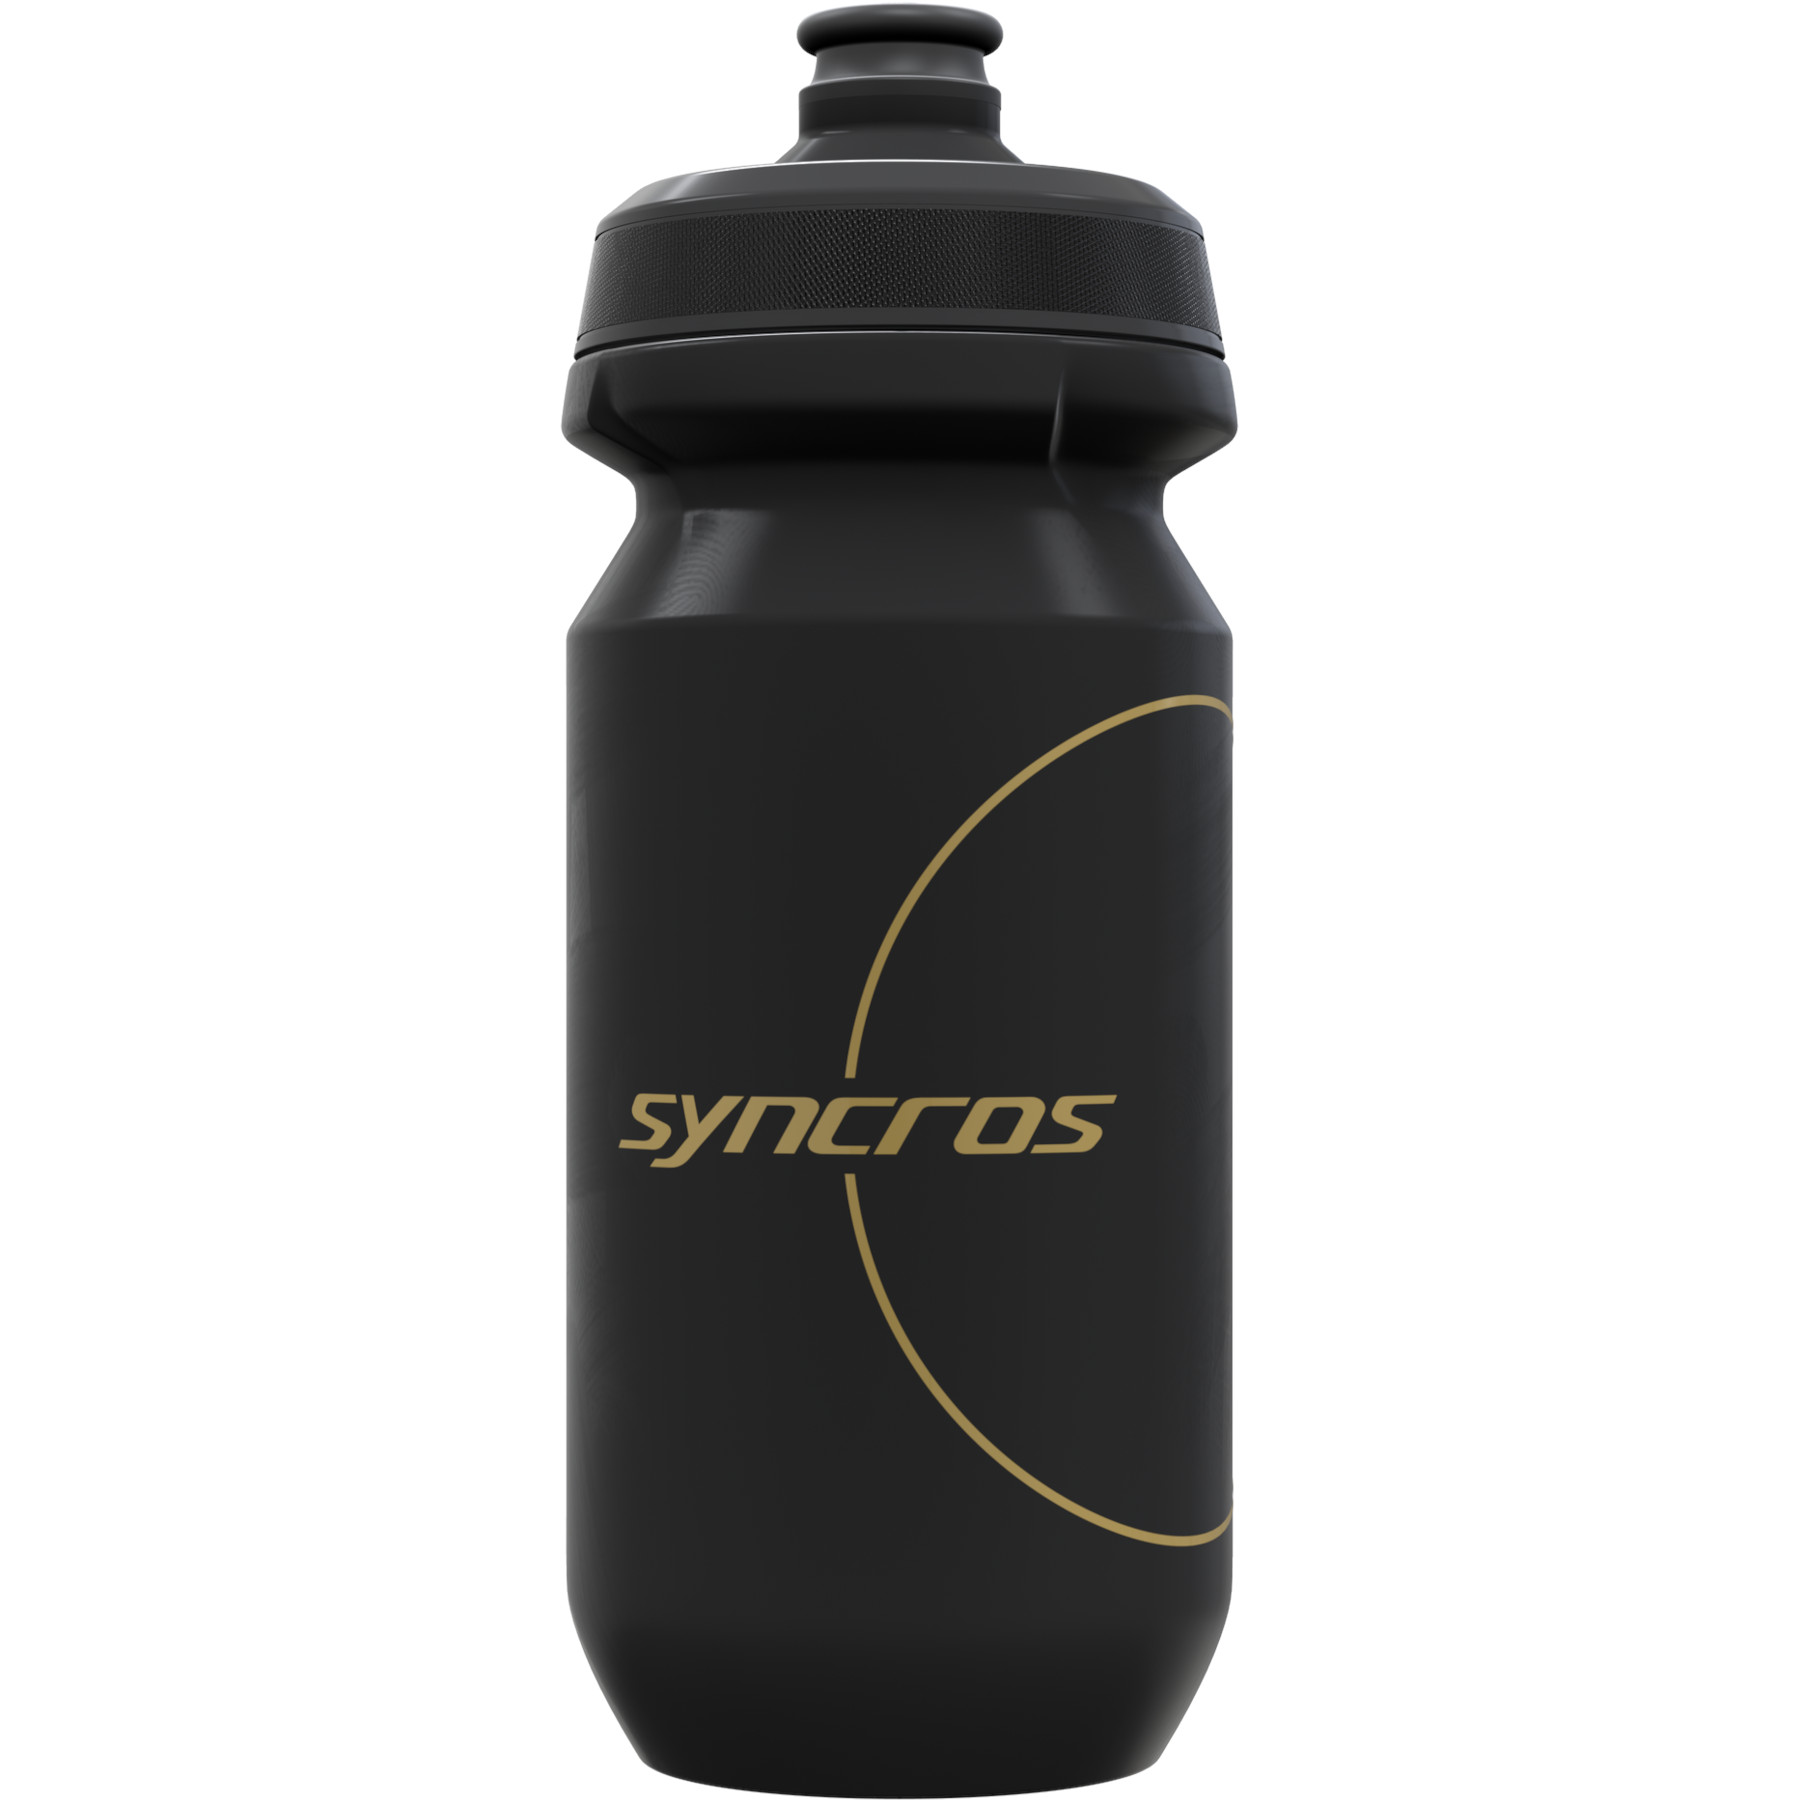 Image of Syncros G5 Moon Water Bottle - 800ml - black/gold